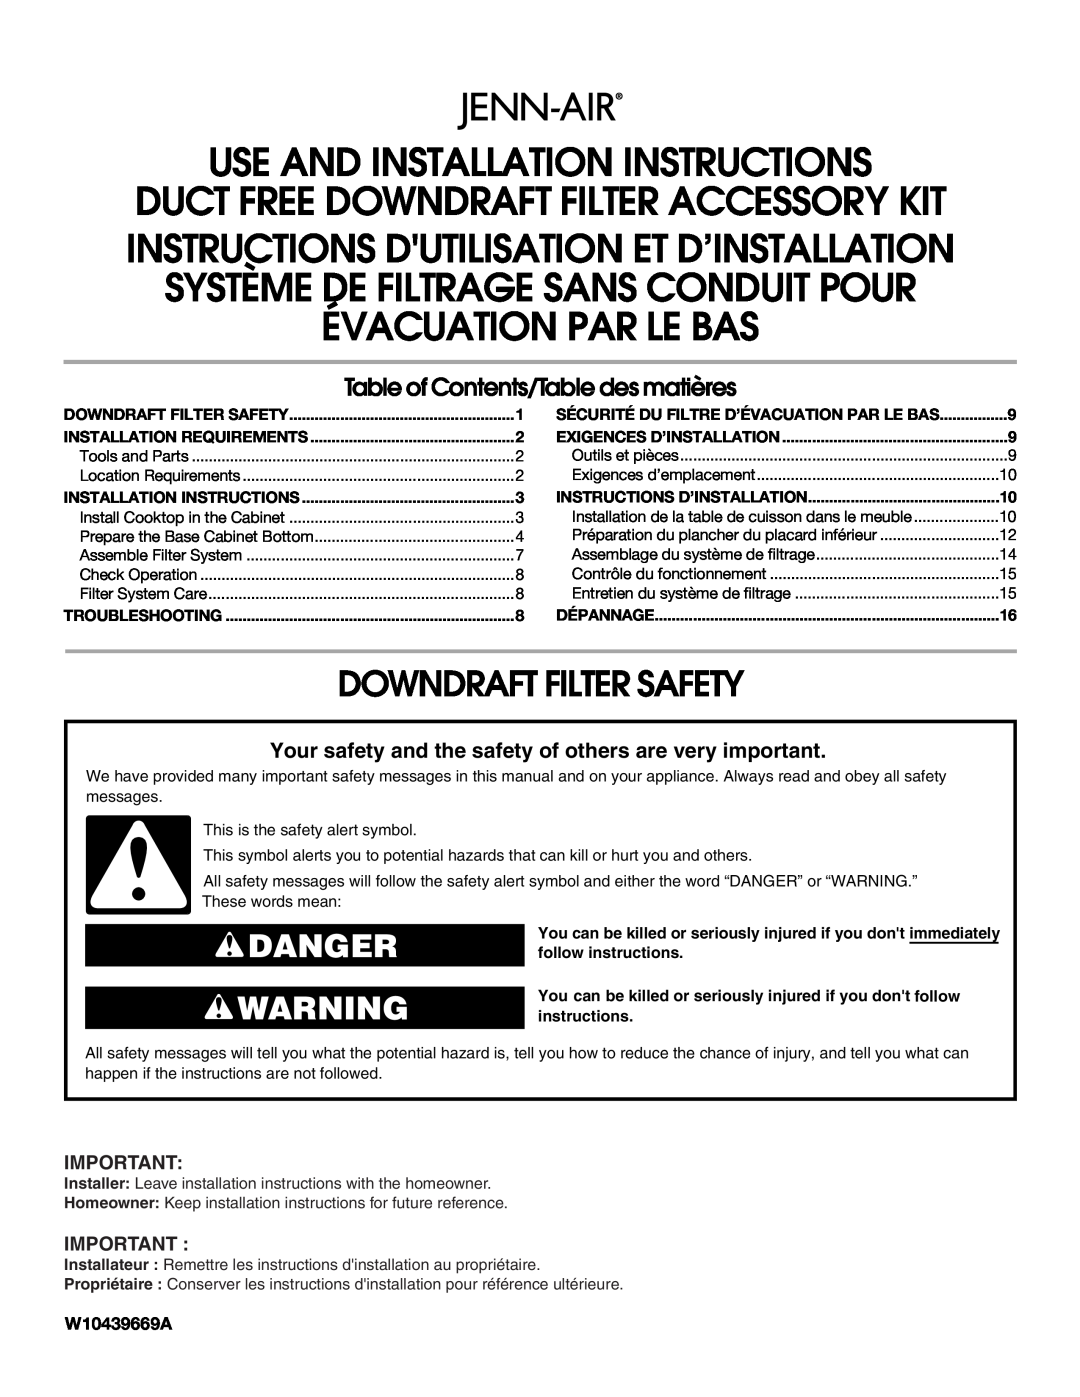 Jenn-Air W10439669A installation instructions Downdraft Filter Safety, Danger, Installation Requirements, Troubleshooting 